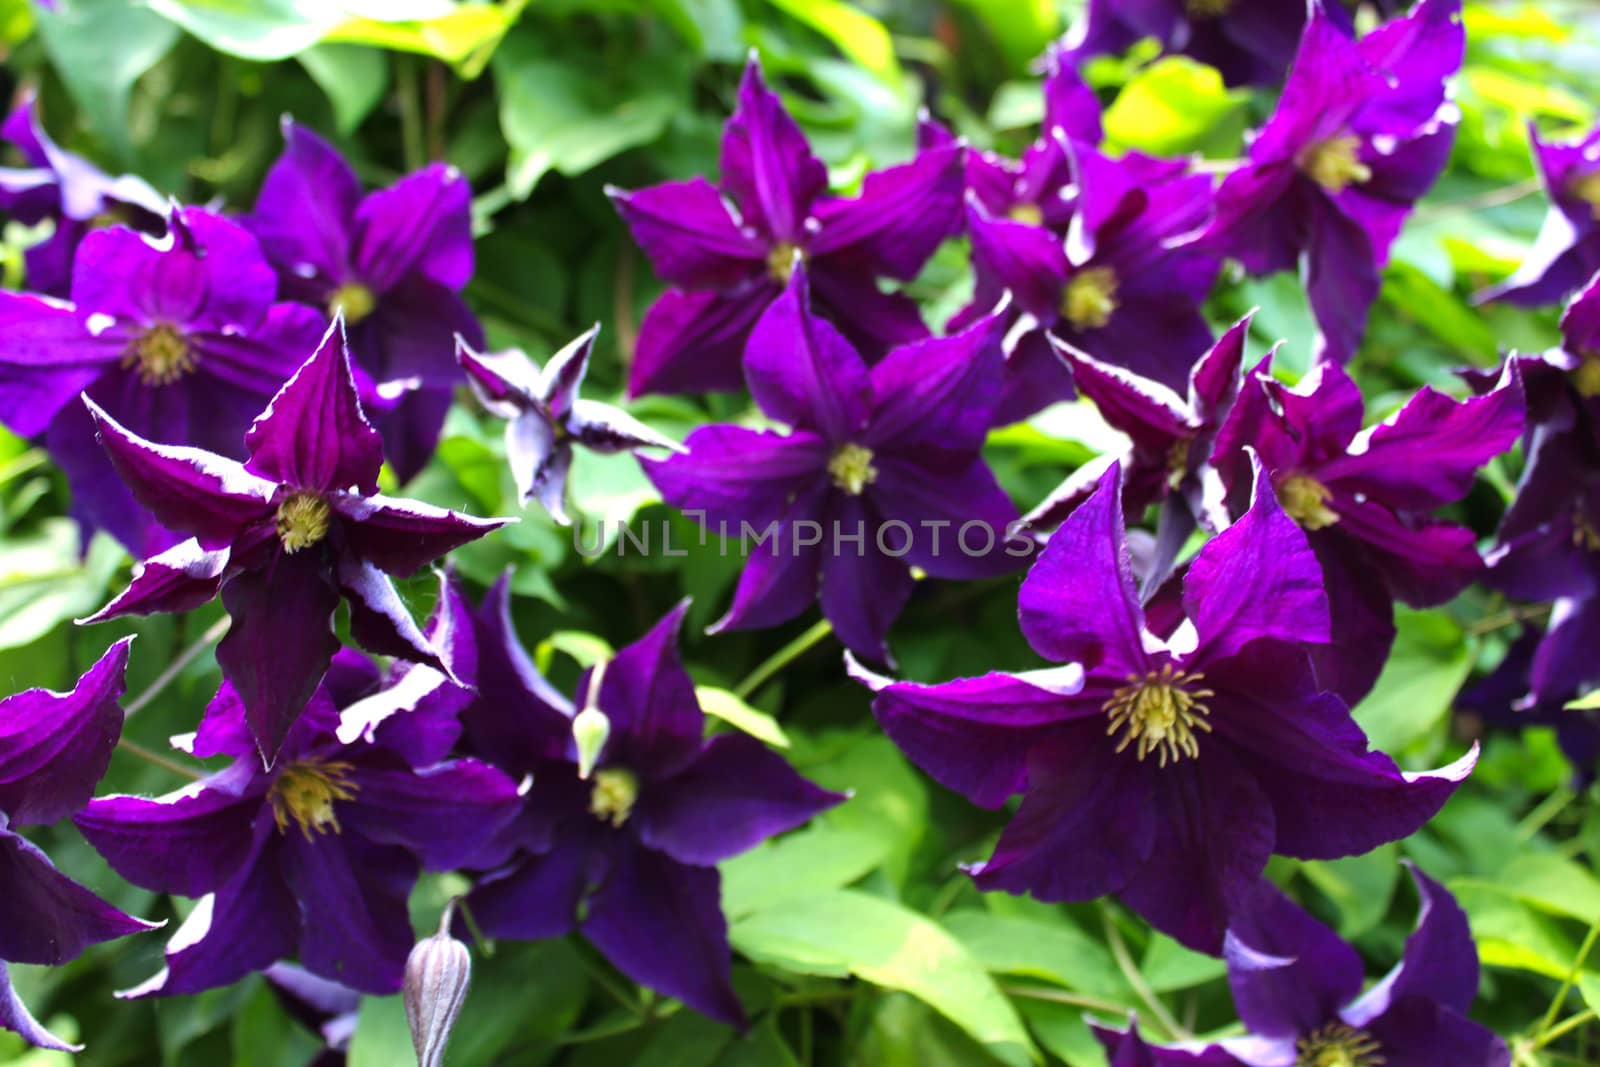 The Clematis flower is a hybrid plant in the Buttercup family and is a favorite of gardeners.